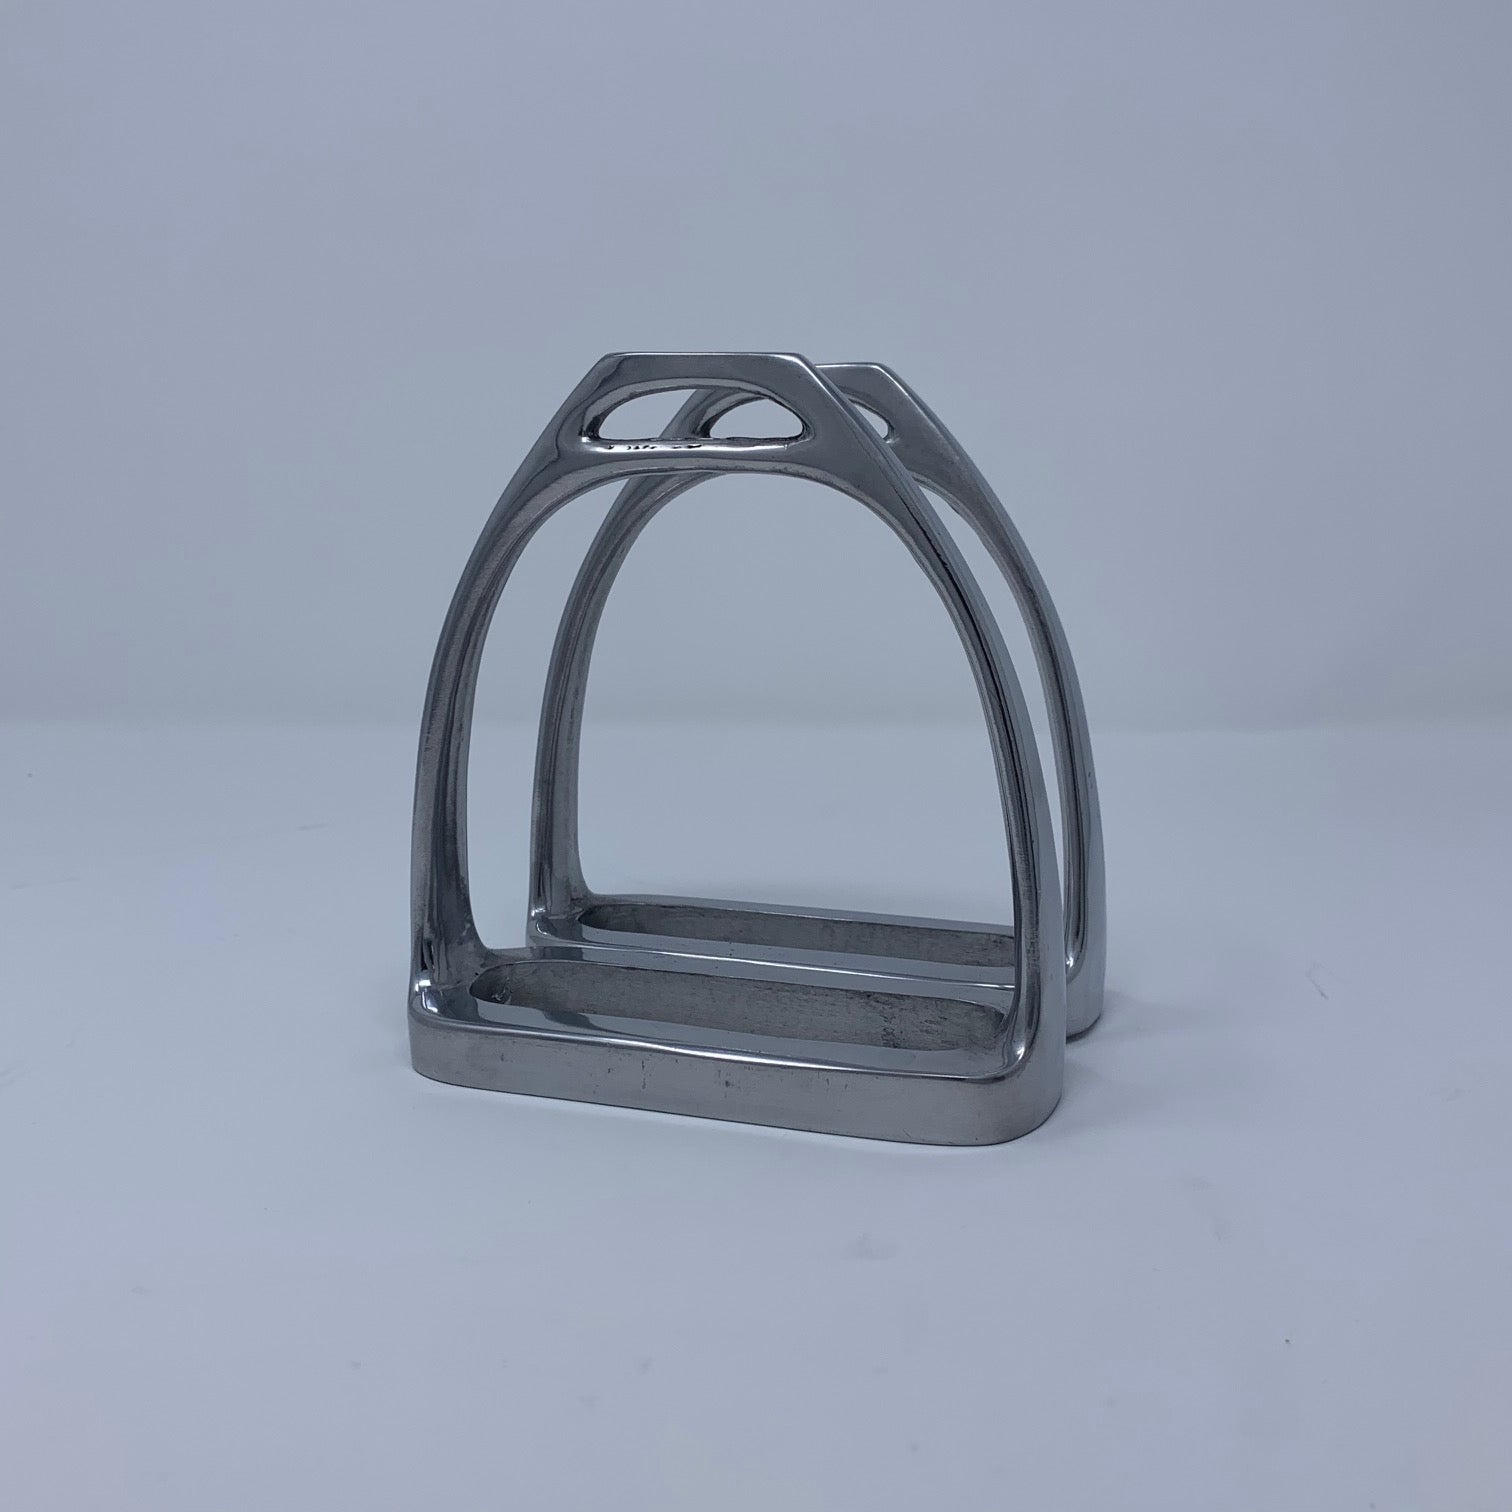 Two Side by Side Stirrups Form Napkin Holder Pictured Empty at Angle